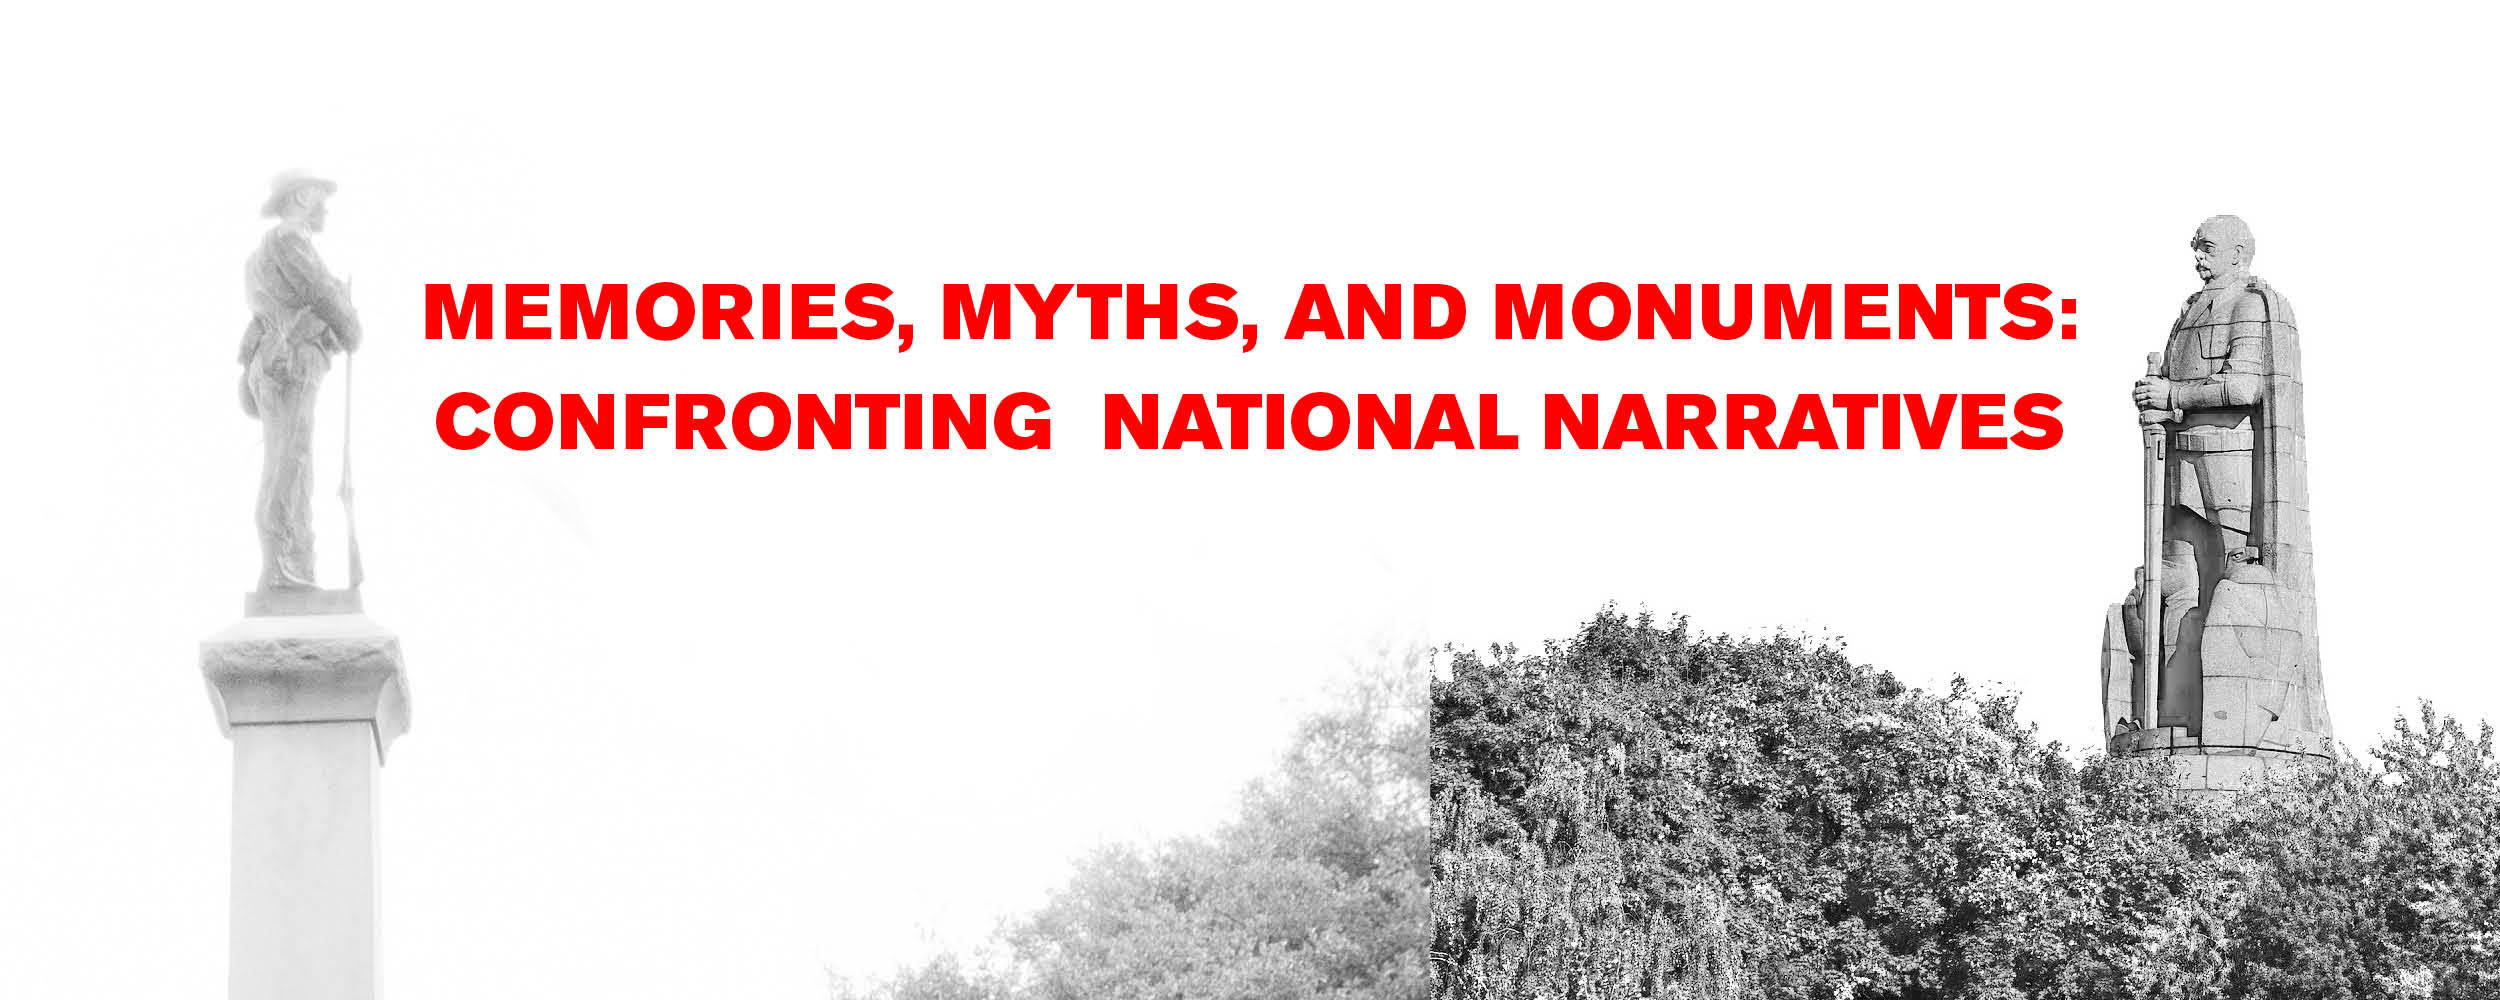 You are currently viewing Memories, Myths, and Monuments: Confronting National Narratives (2020)